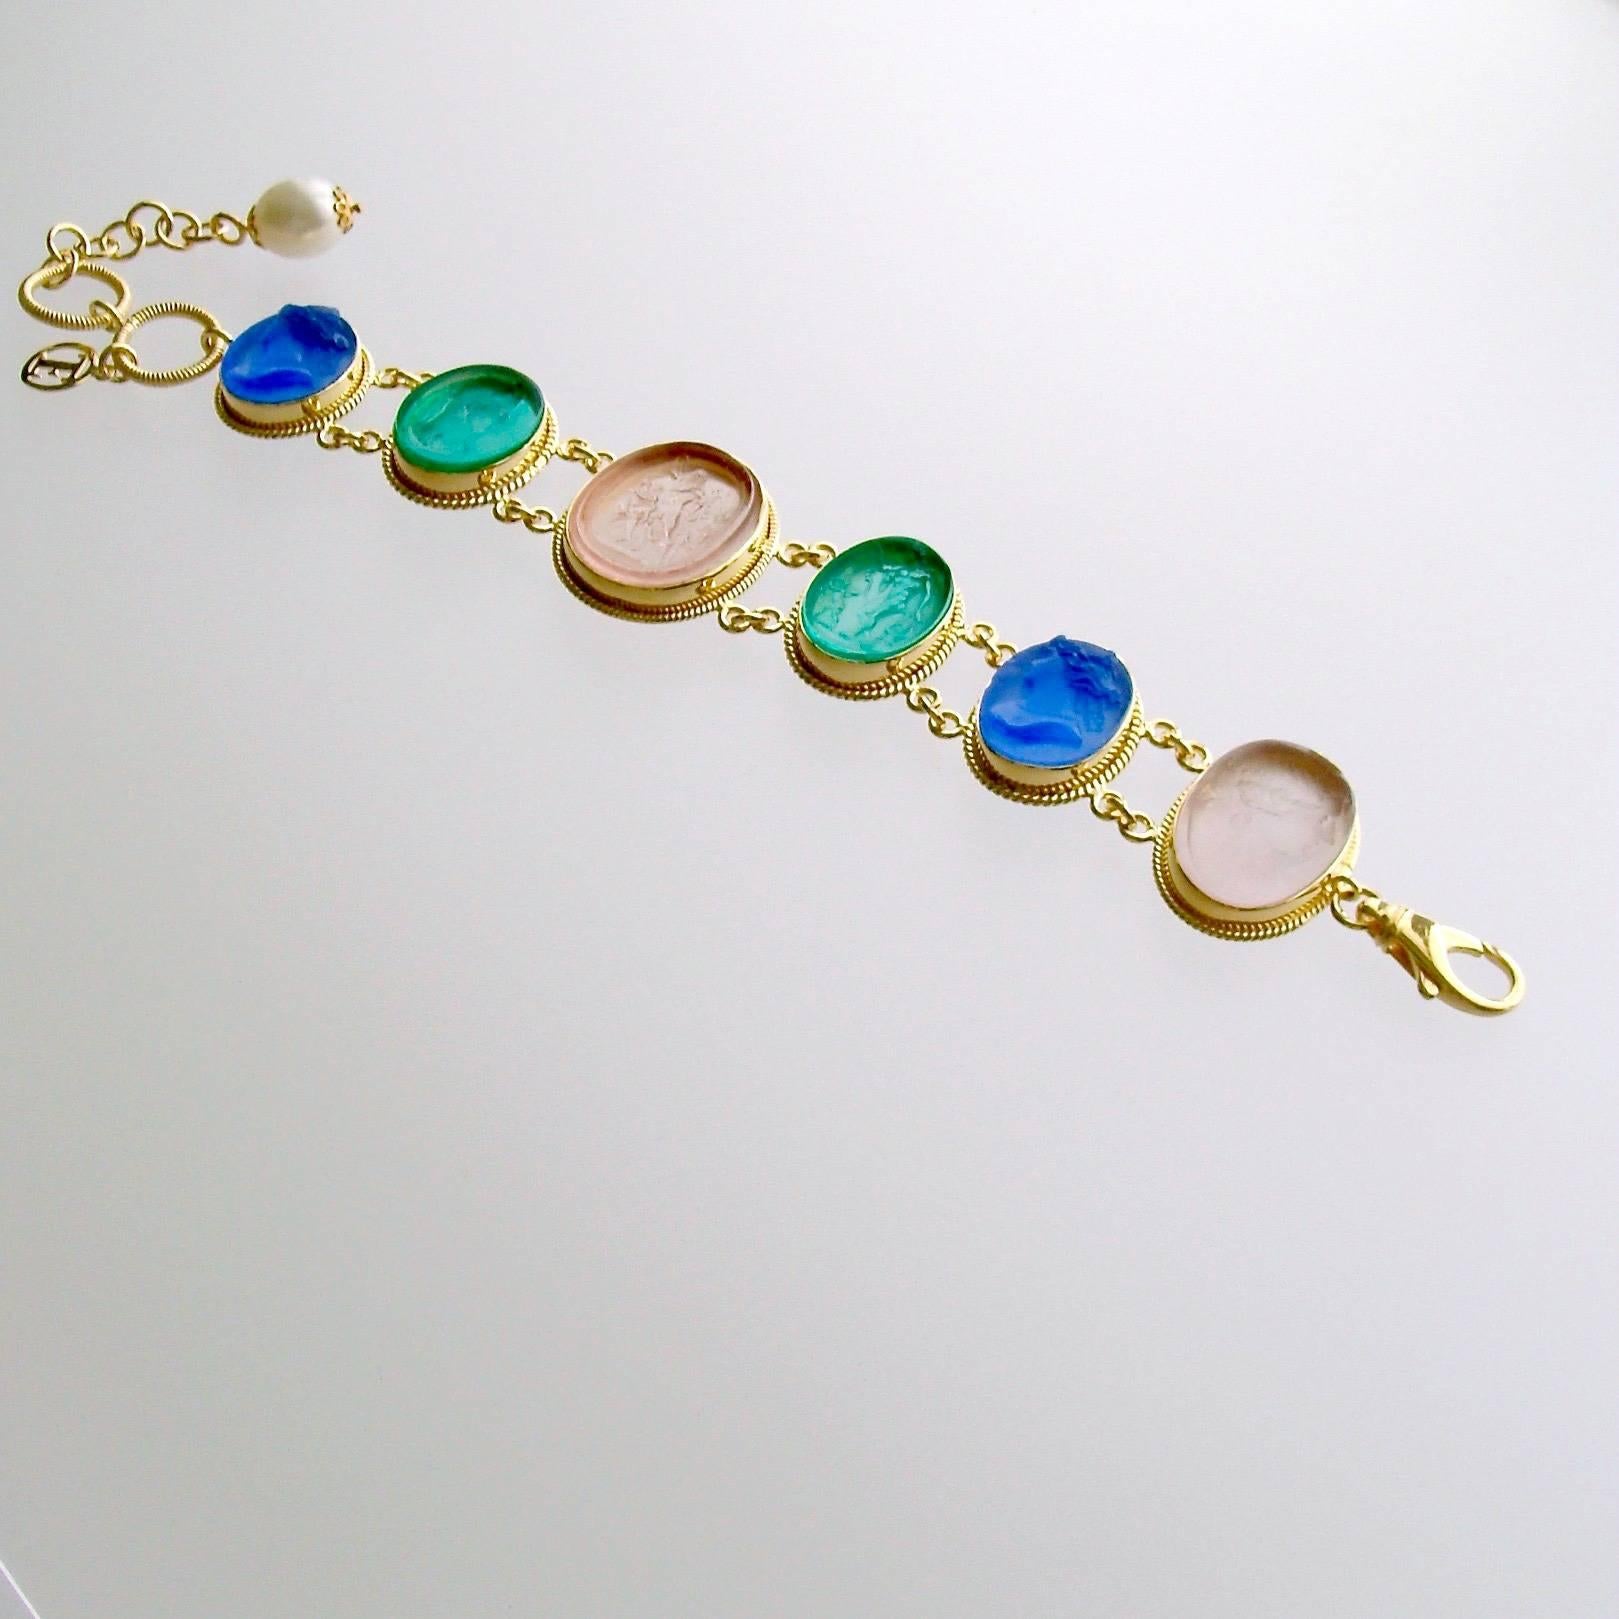 Belluno Bracelet.

A stunning collection of  Venetian glass cameo/intaglios in lapis blue, emerald green and blush pink, have been married together to create this classic bracelet.  Each of the gorgeous intaglios/cameos sits in bezeled mountings